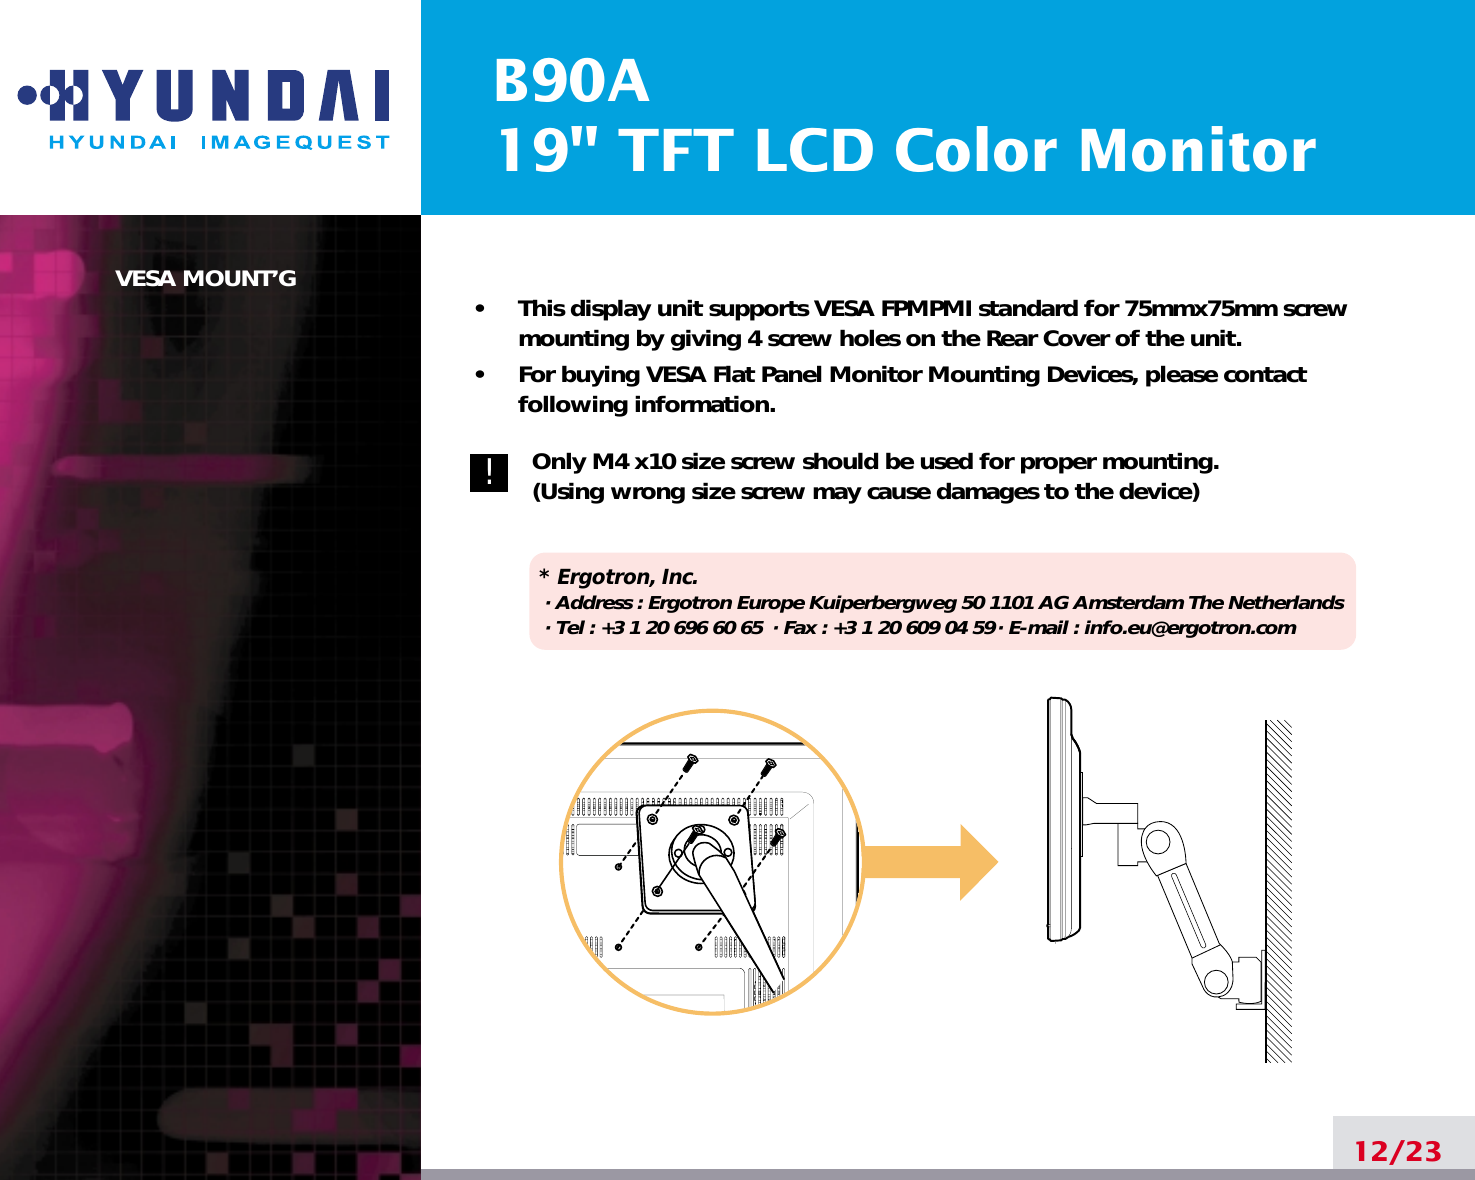 B90A19&quot; TFT LCD Color MonitorVESA MOUNT’G•     This display unit supports VESA FPMPMI standard for 75mmx75mm screwmounting by giving 4 screw holes on the Rear Cover of the unit.•     For buying VESA Flat Panel Monitor Mounting Devices, please contactfollowing information.Only M4 x10 size screw should be used for proper mounting.(Using wrong size screw may cause damages to the device)* Ergotron, Inc.· Address : Ergotron Europe Kuiperbergweg 50 1101 AG Amsterdam The Netherlands· Tel : +3 1 20 696 60 65 · Fax : +3 1 20 609 04 59· E-mail : info.eu@ergotron.com12/23!